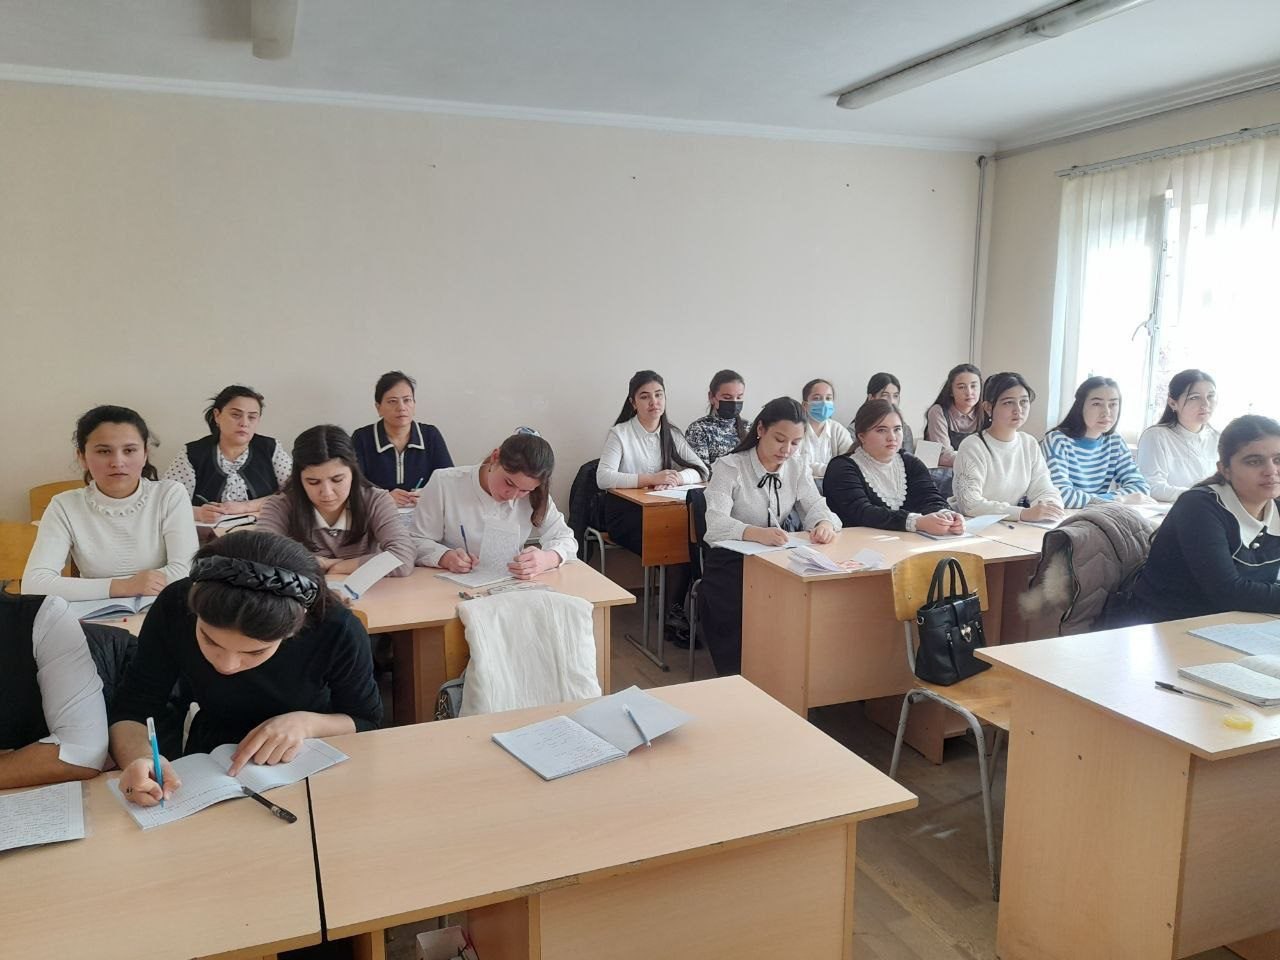 The issue of quality organization of lessons is in the attention of teachers